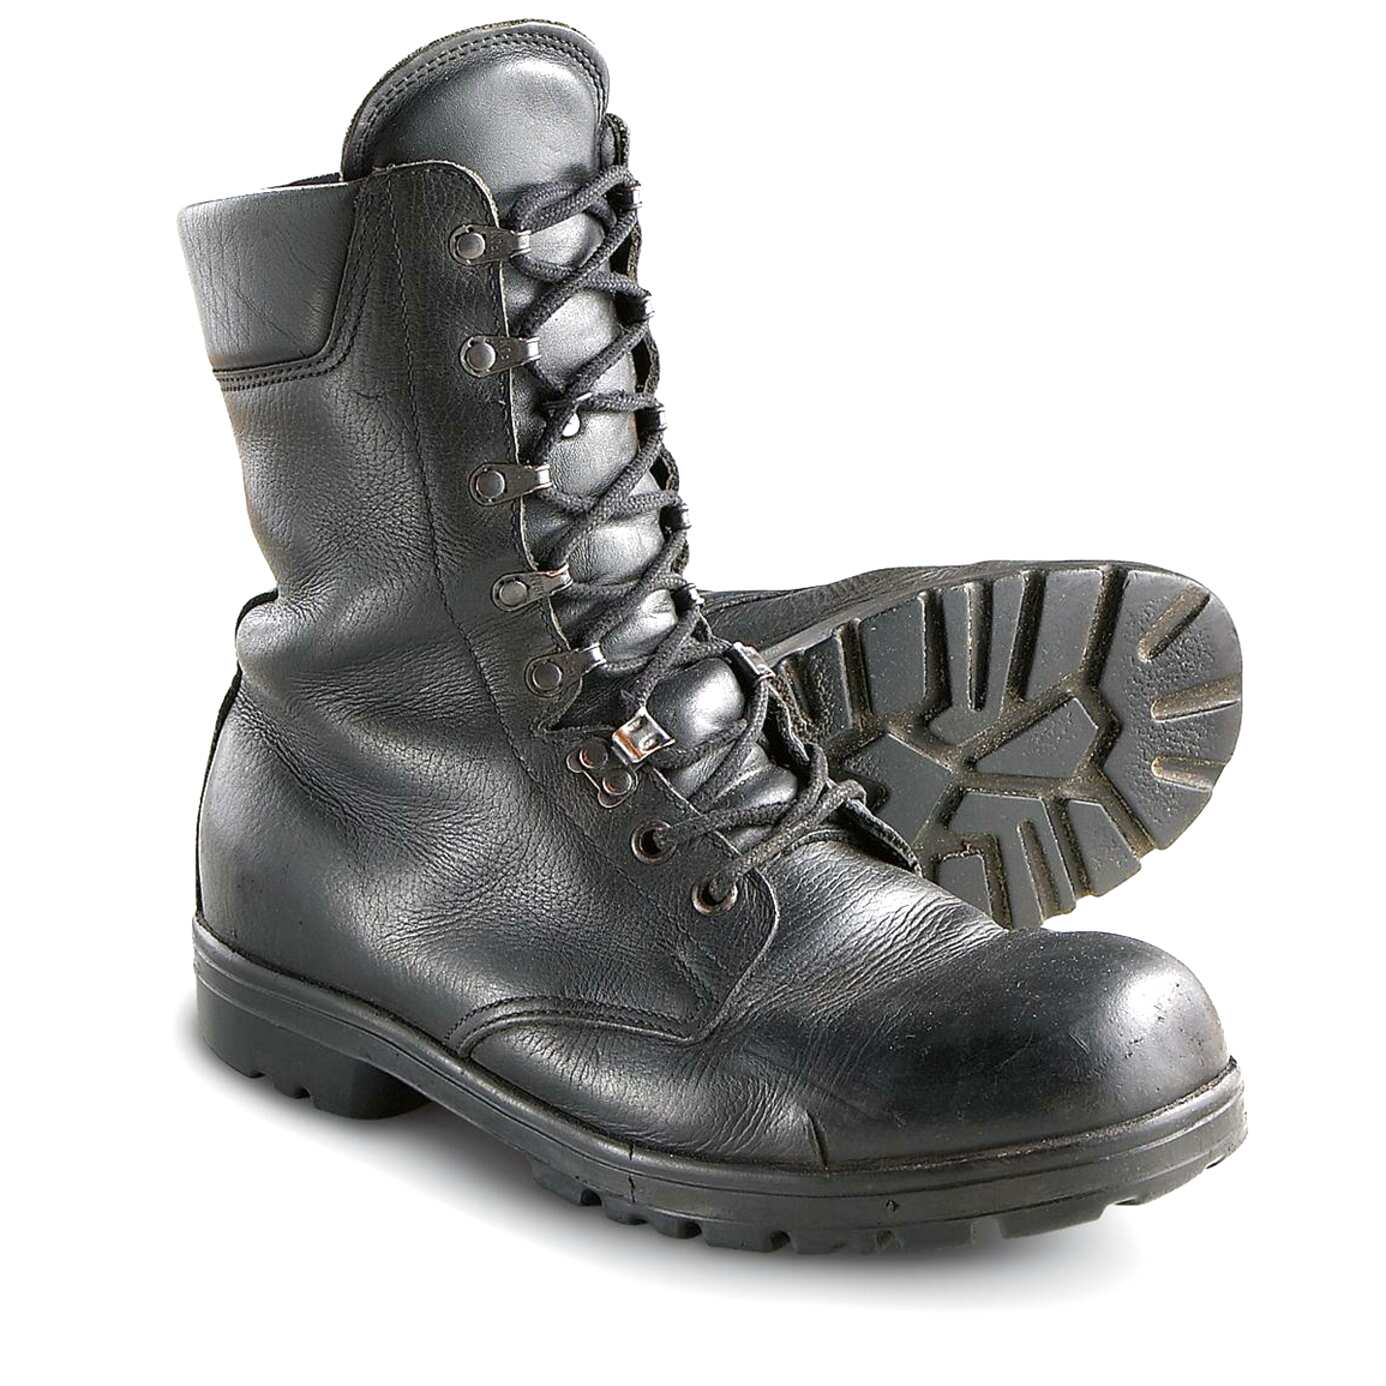 Dutch Army Boots for sale in UK | 21 used Dutch Army Boots